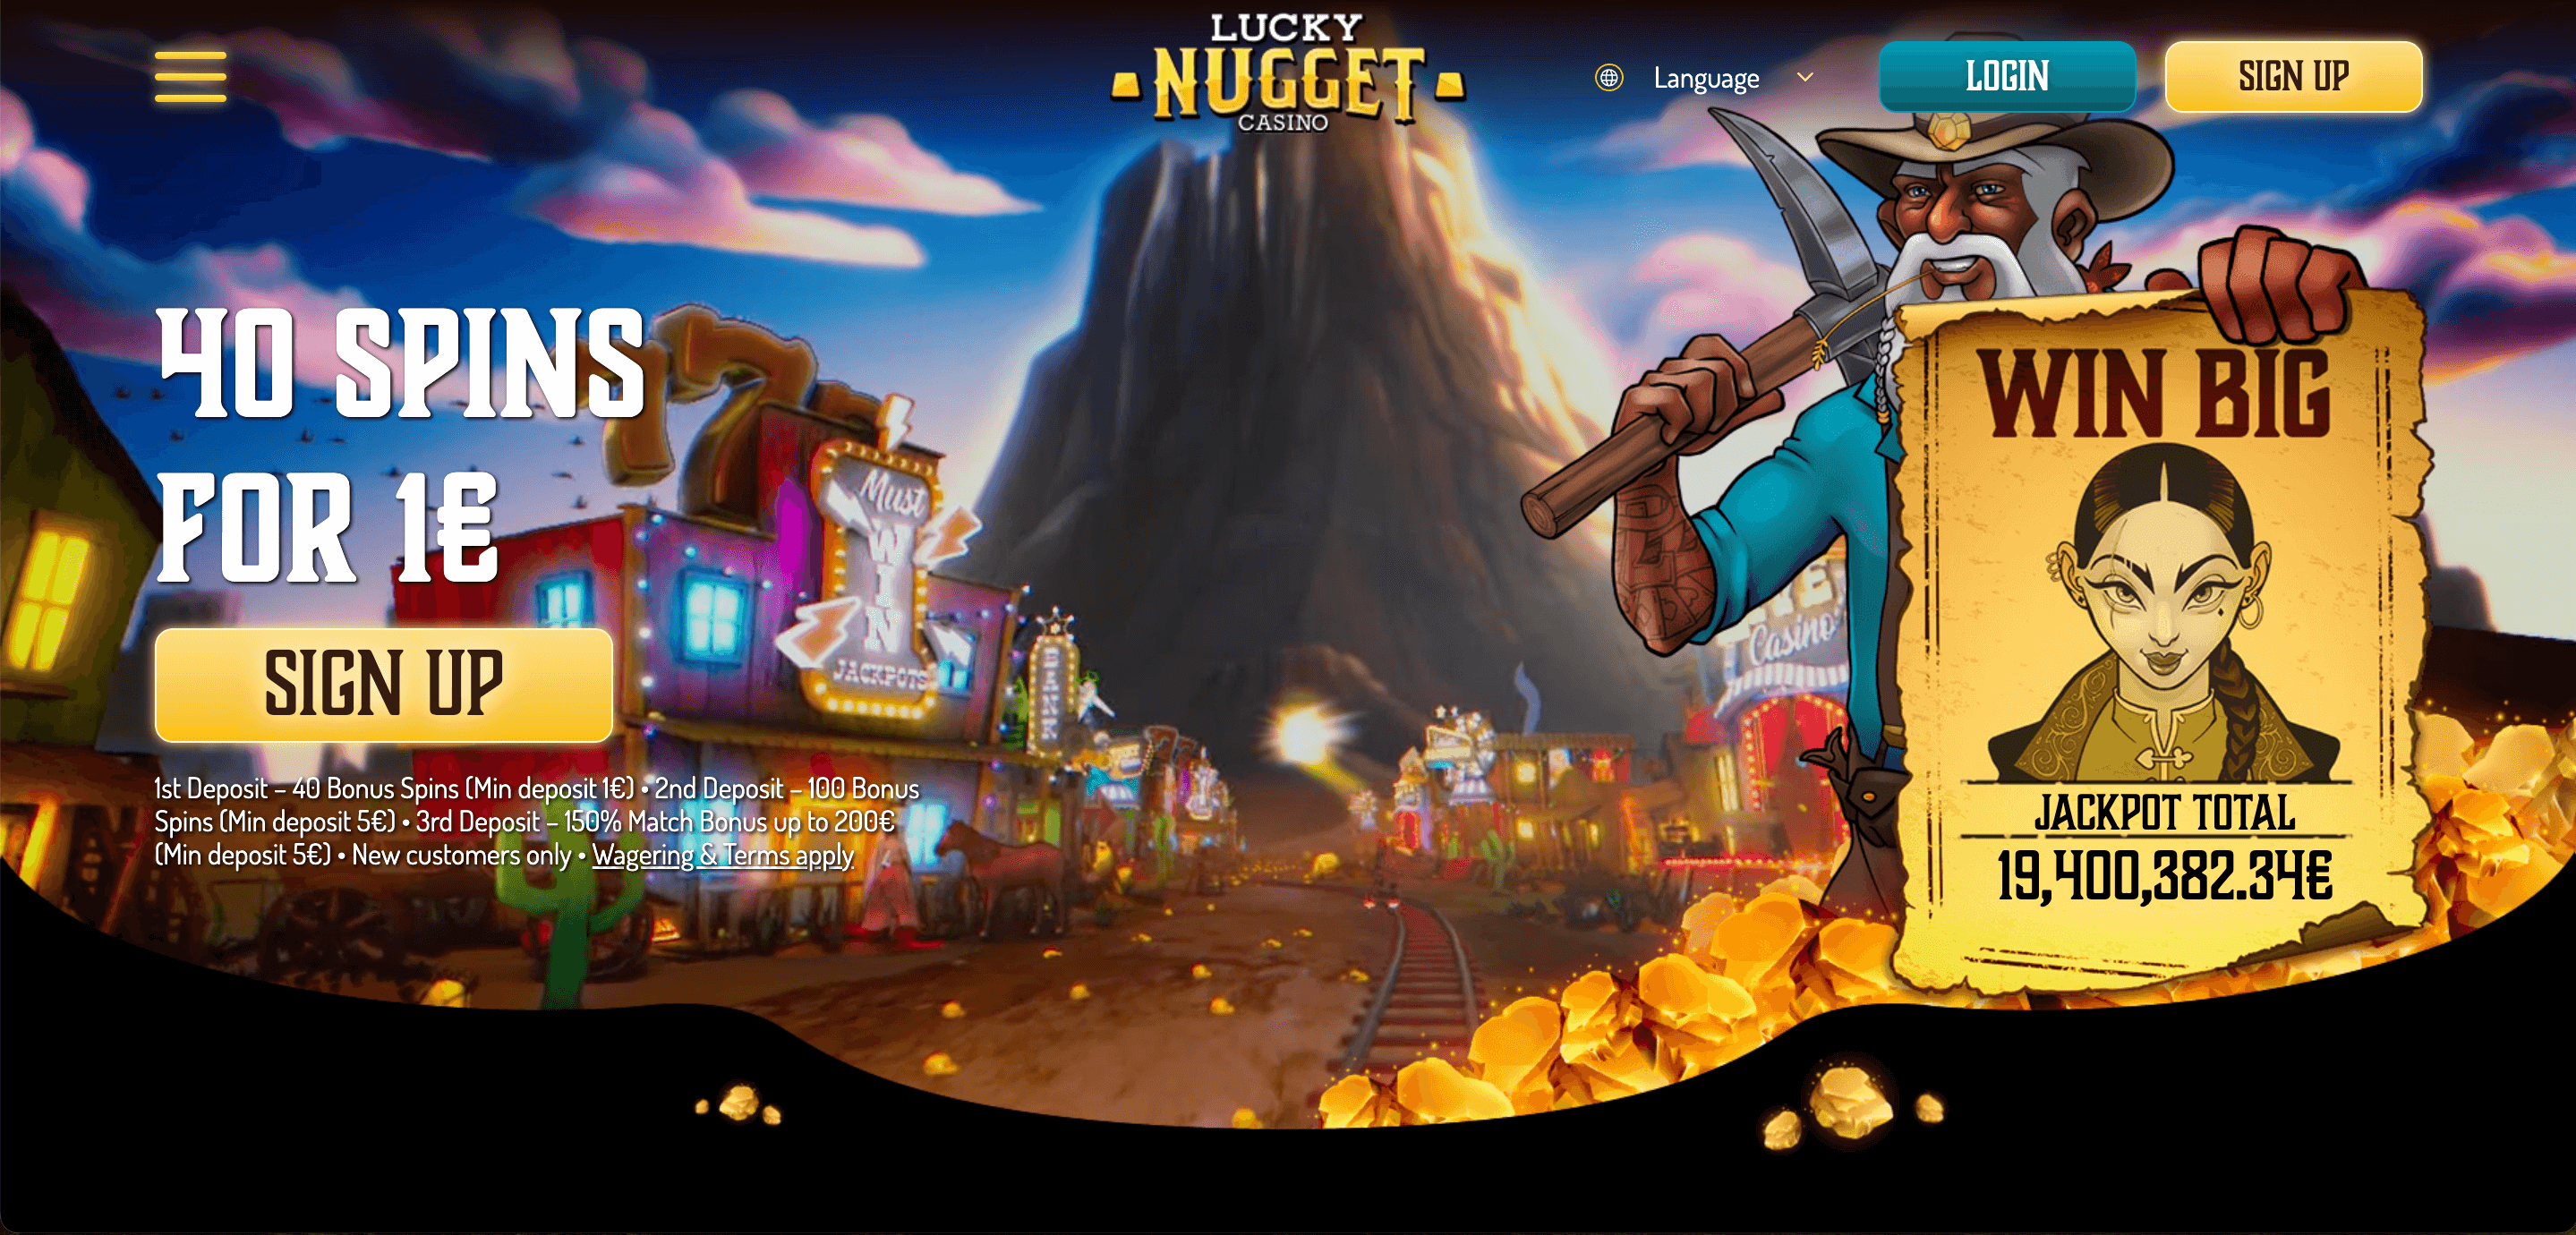 LuckyNugget casino